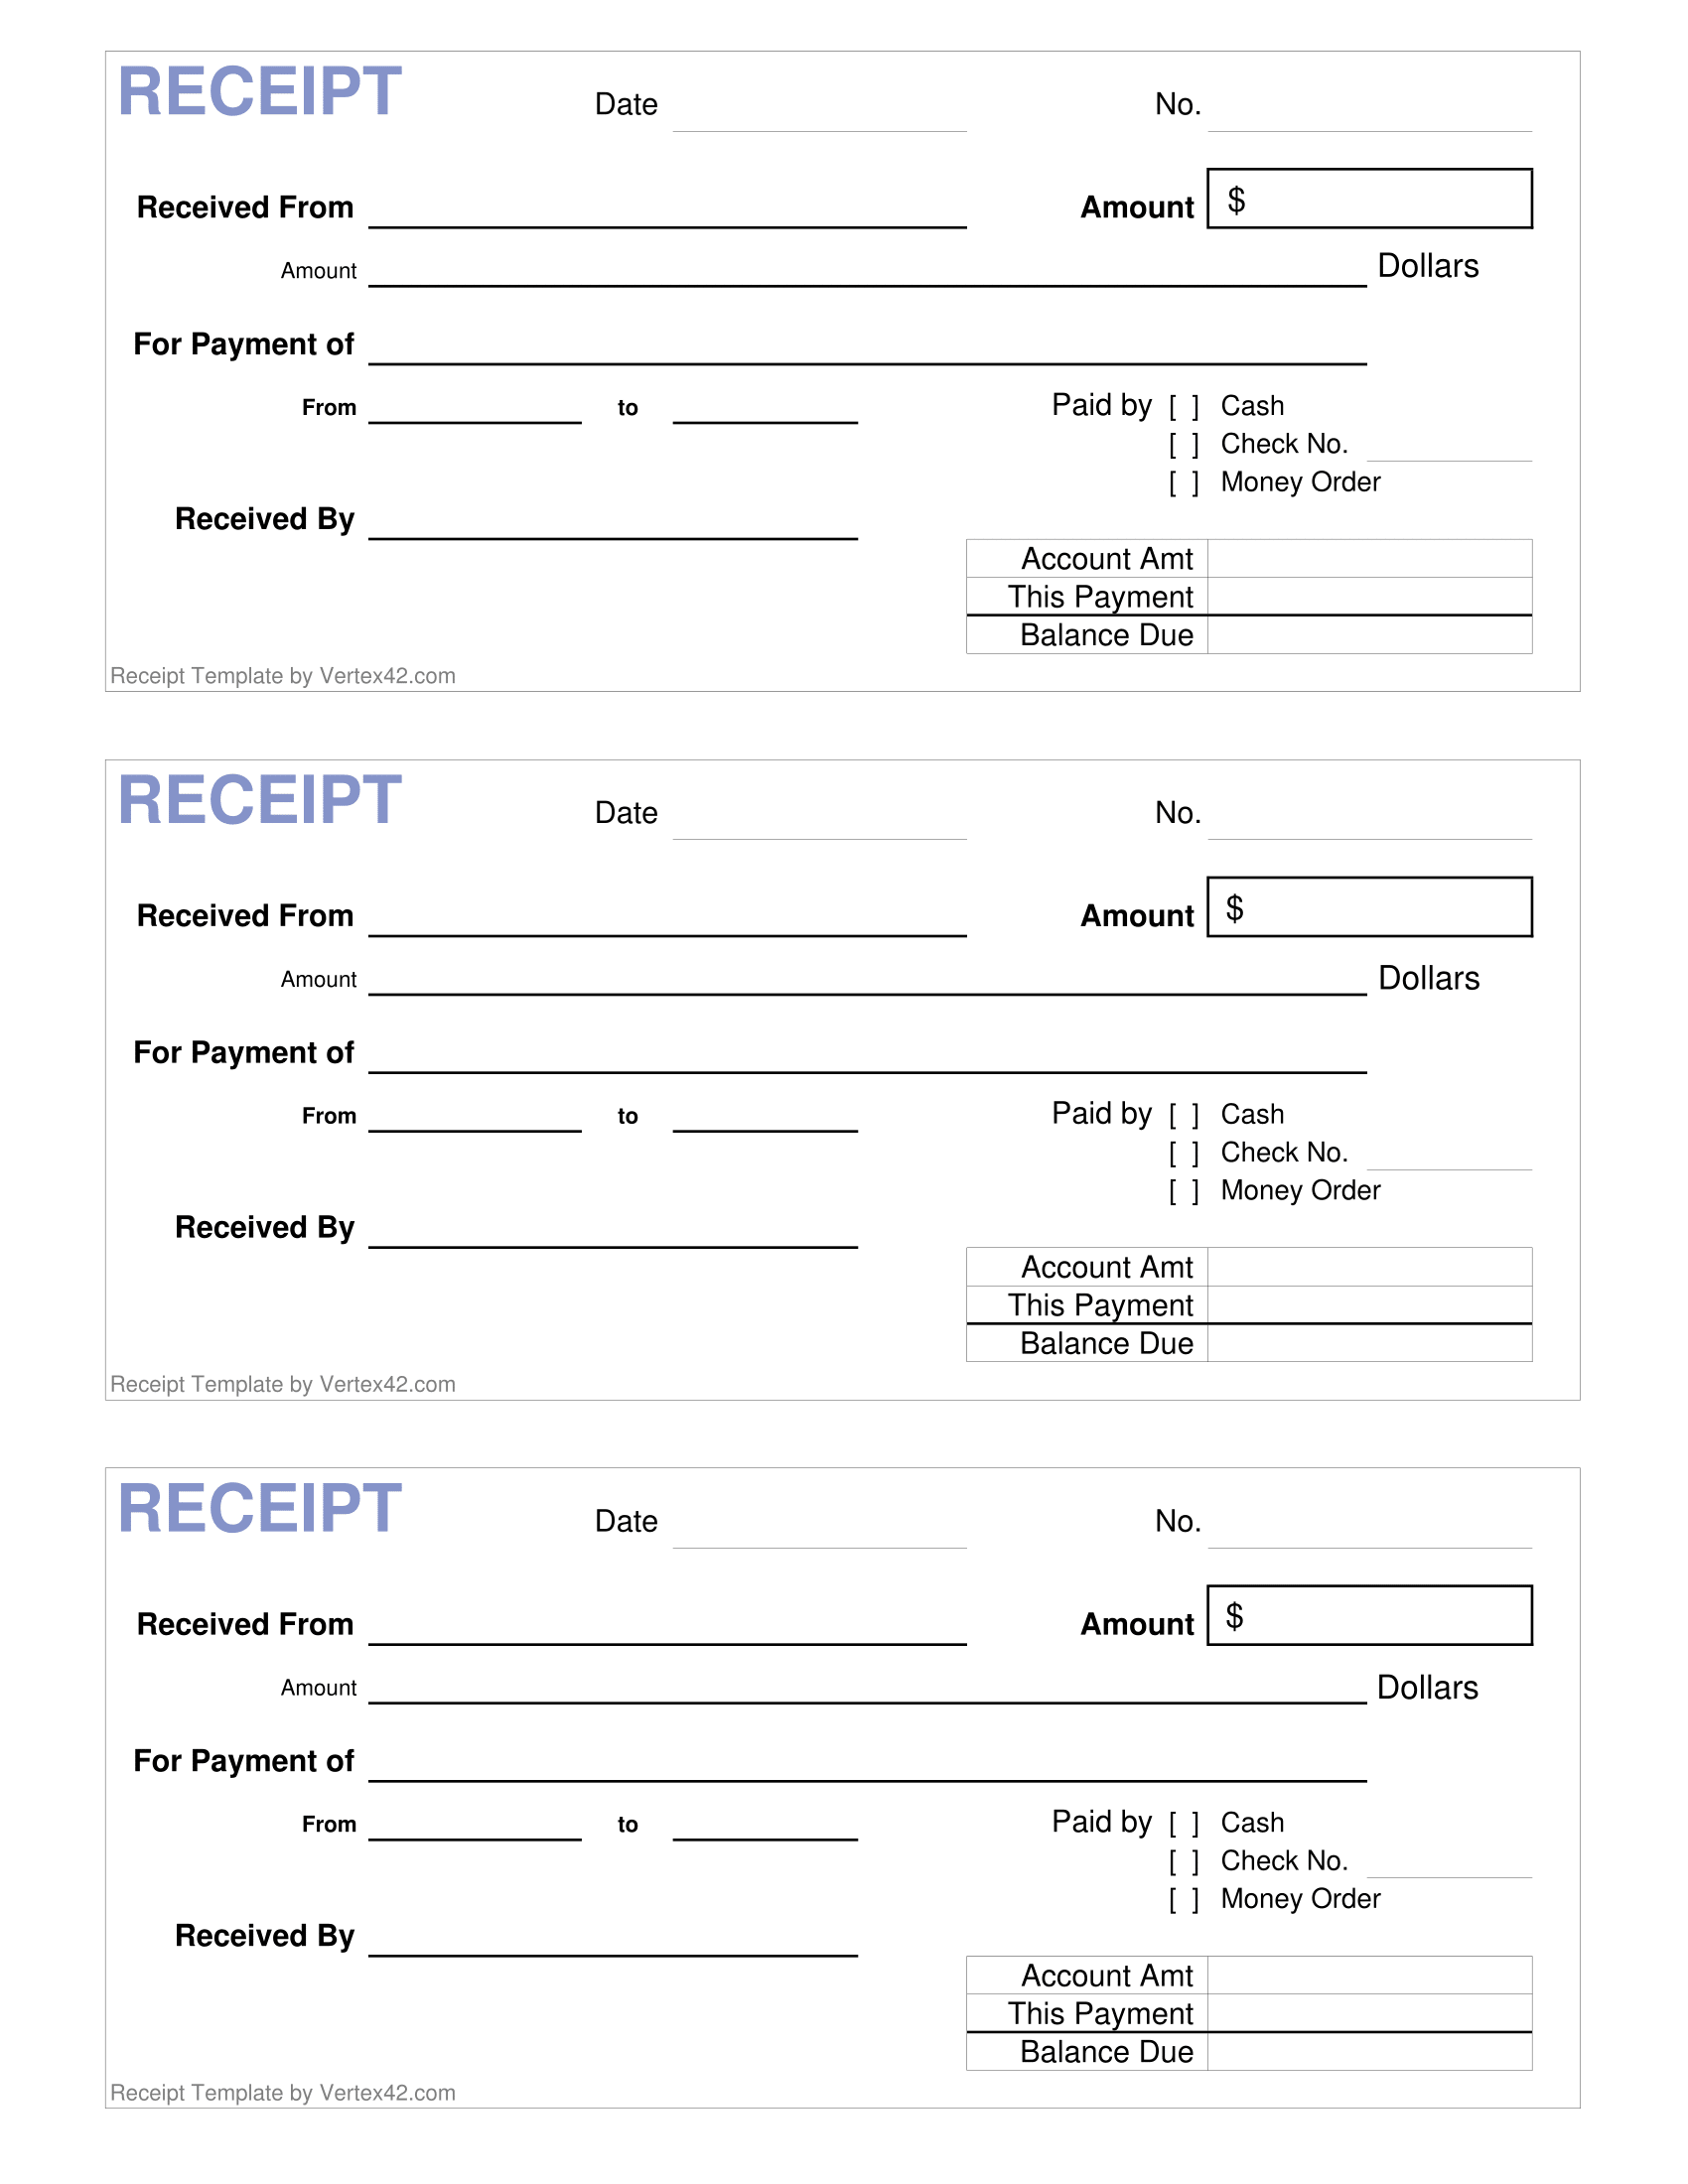 Receipt Template - Download FREE Business Letter Templates and Forms